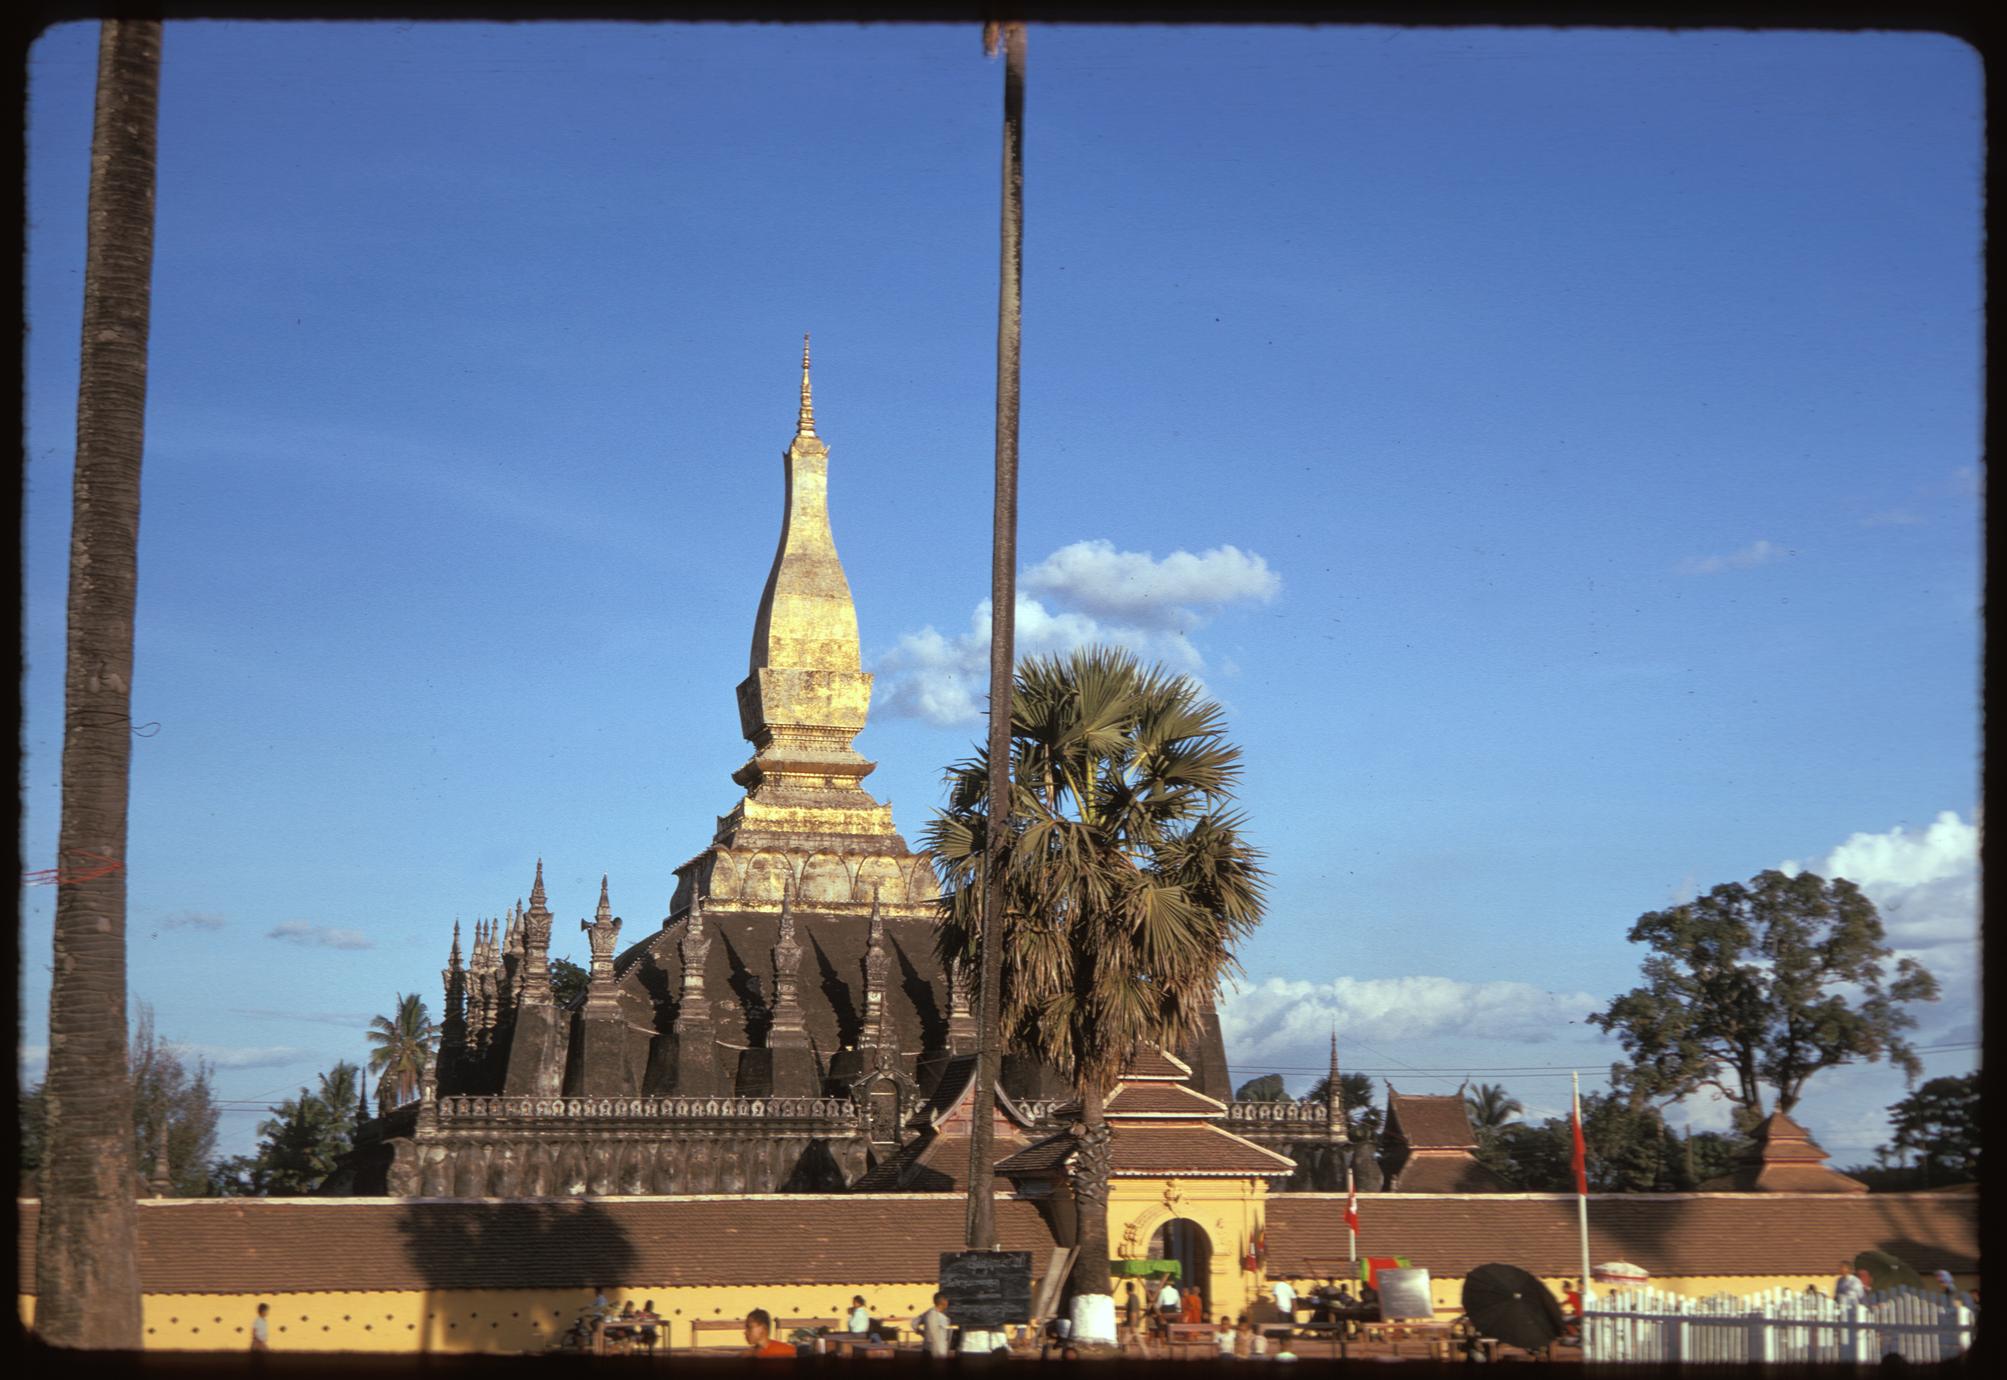 General view of That Luang